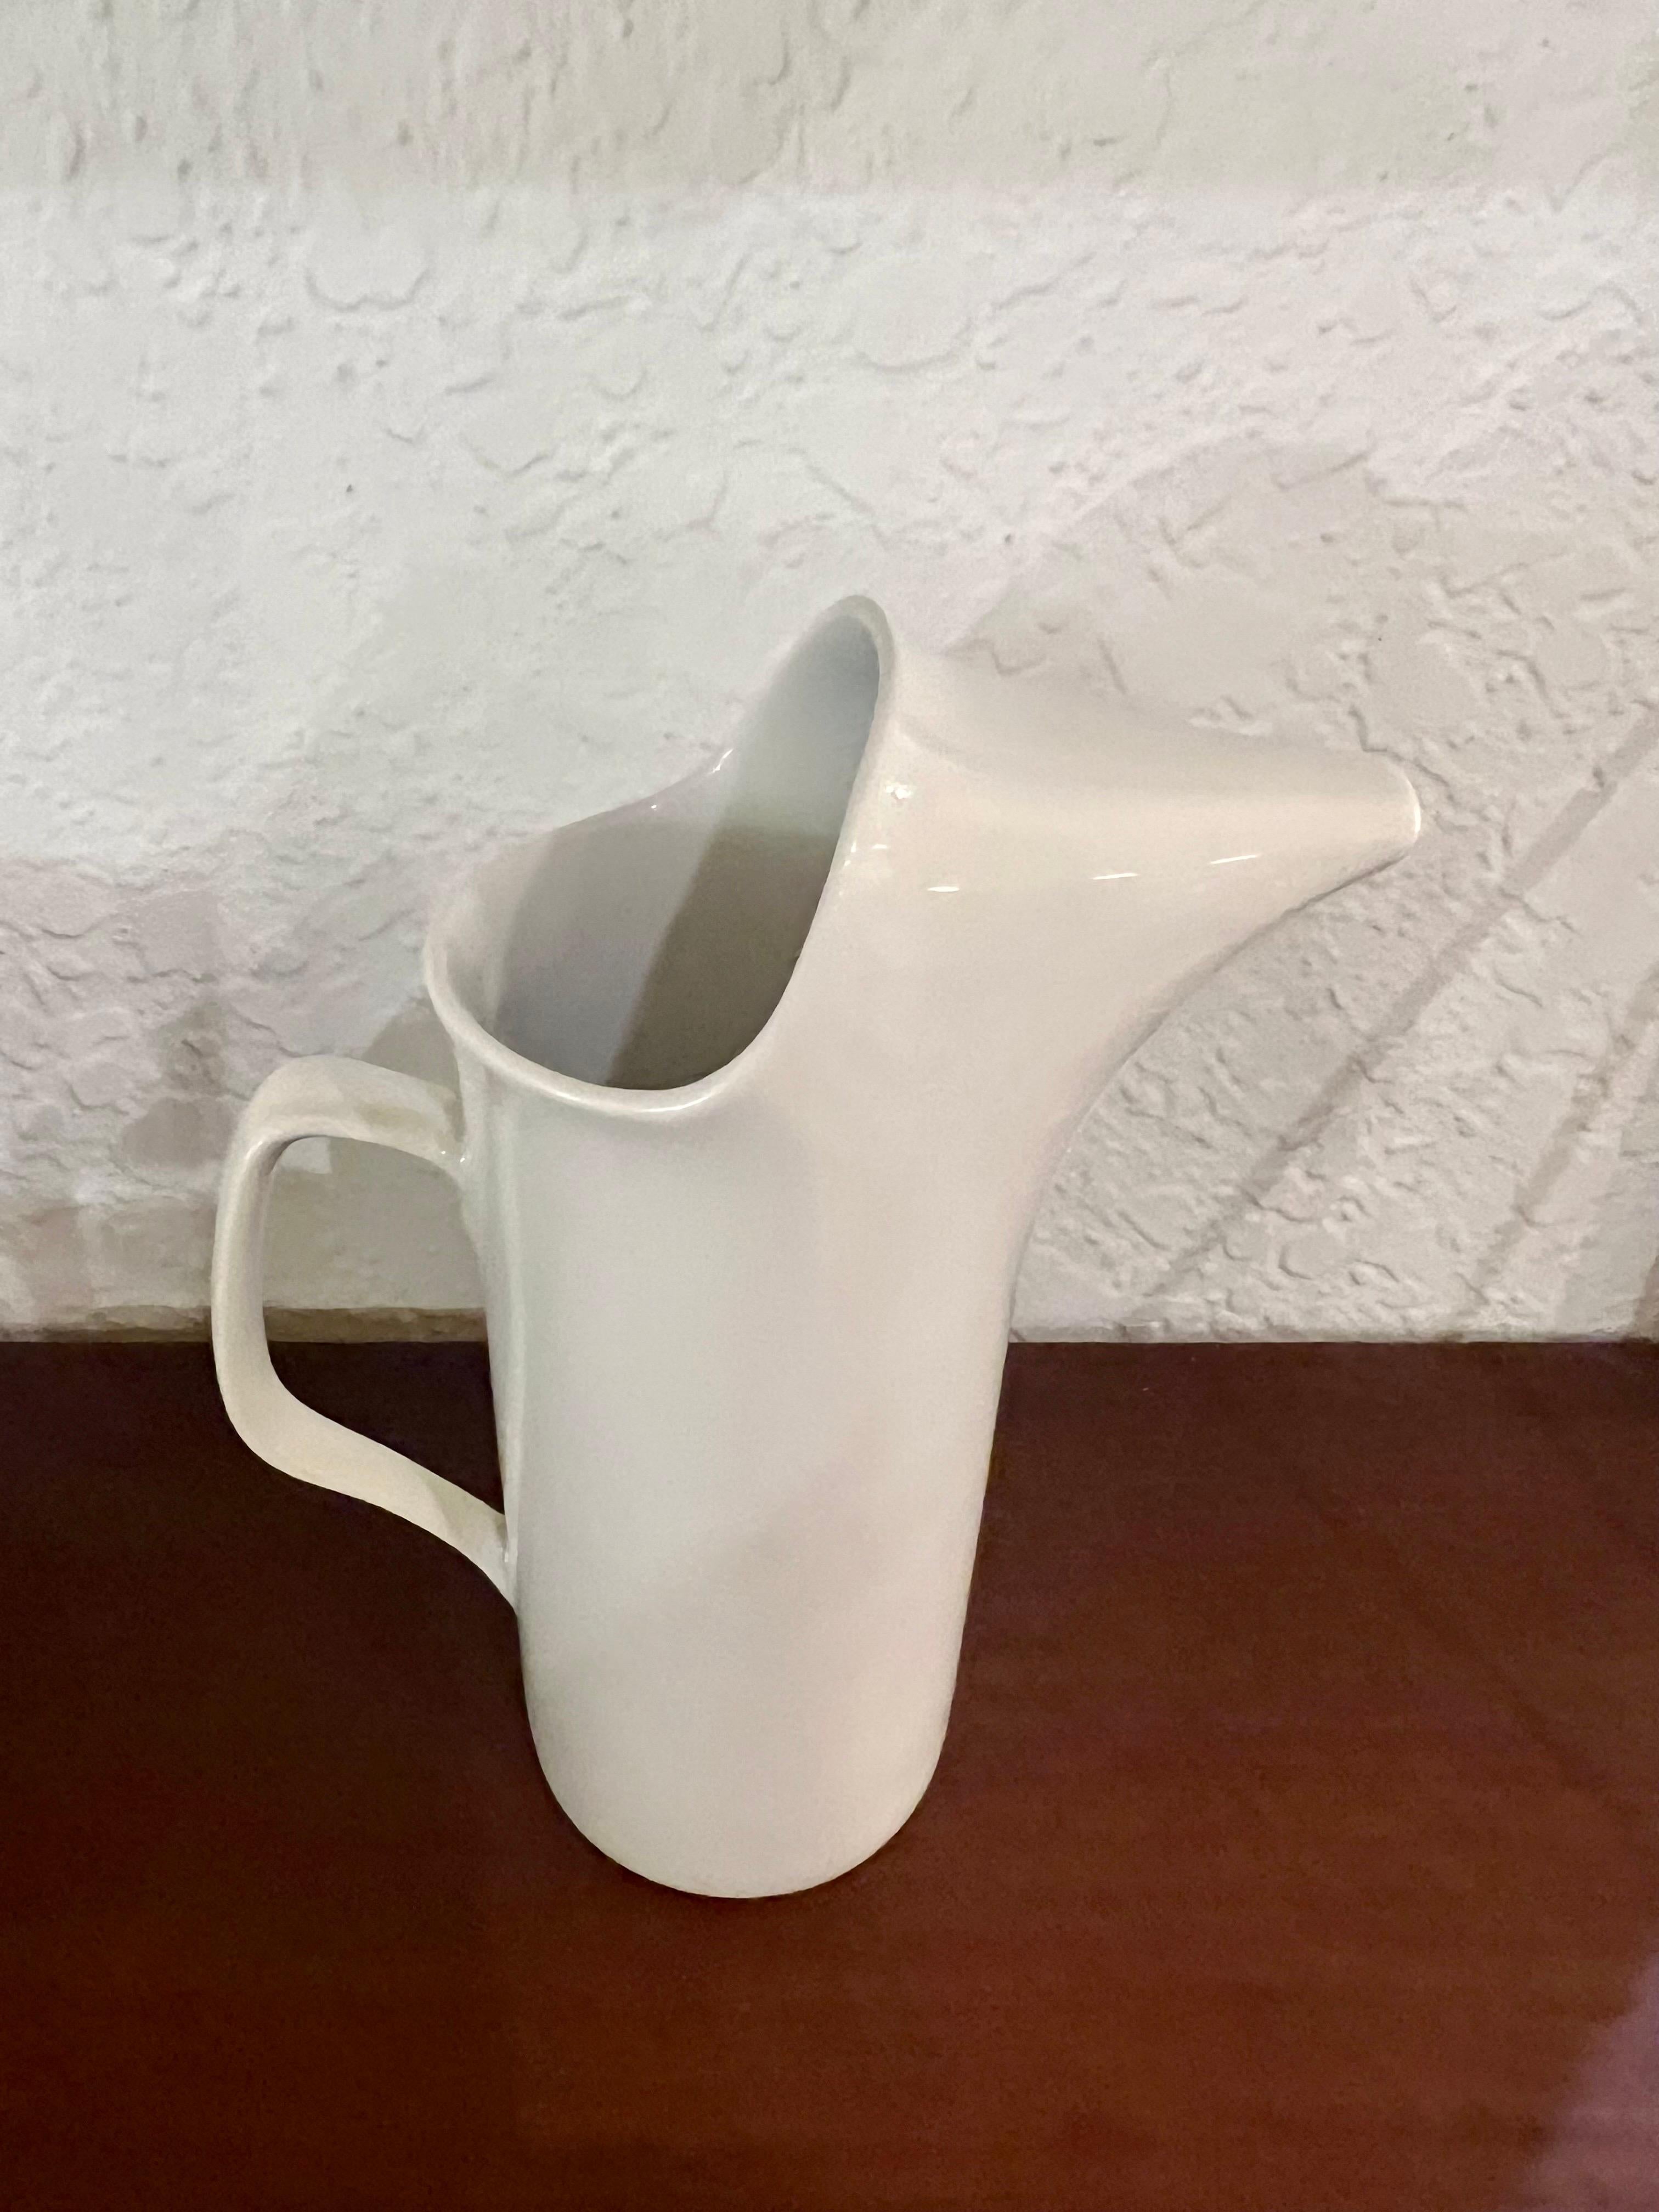 Mid-century modern small ironstone porcelain pitcher (creamer) by Lagardo Tackett for Schmid, circa 1950s. The piece is in very good vintage condition with no chips or cracks.